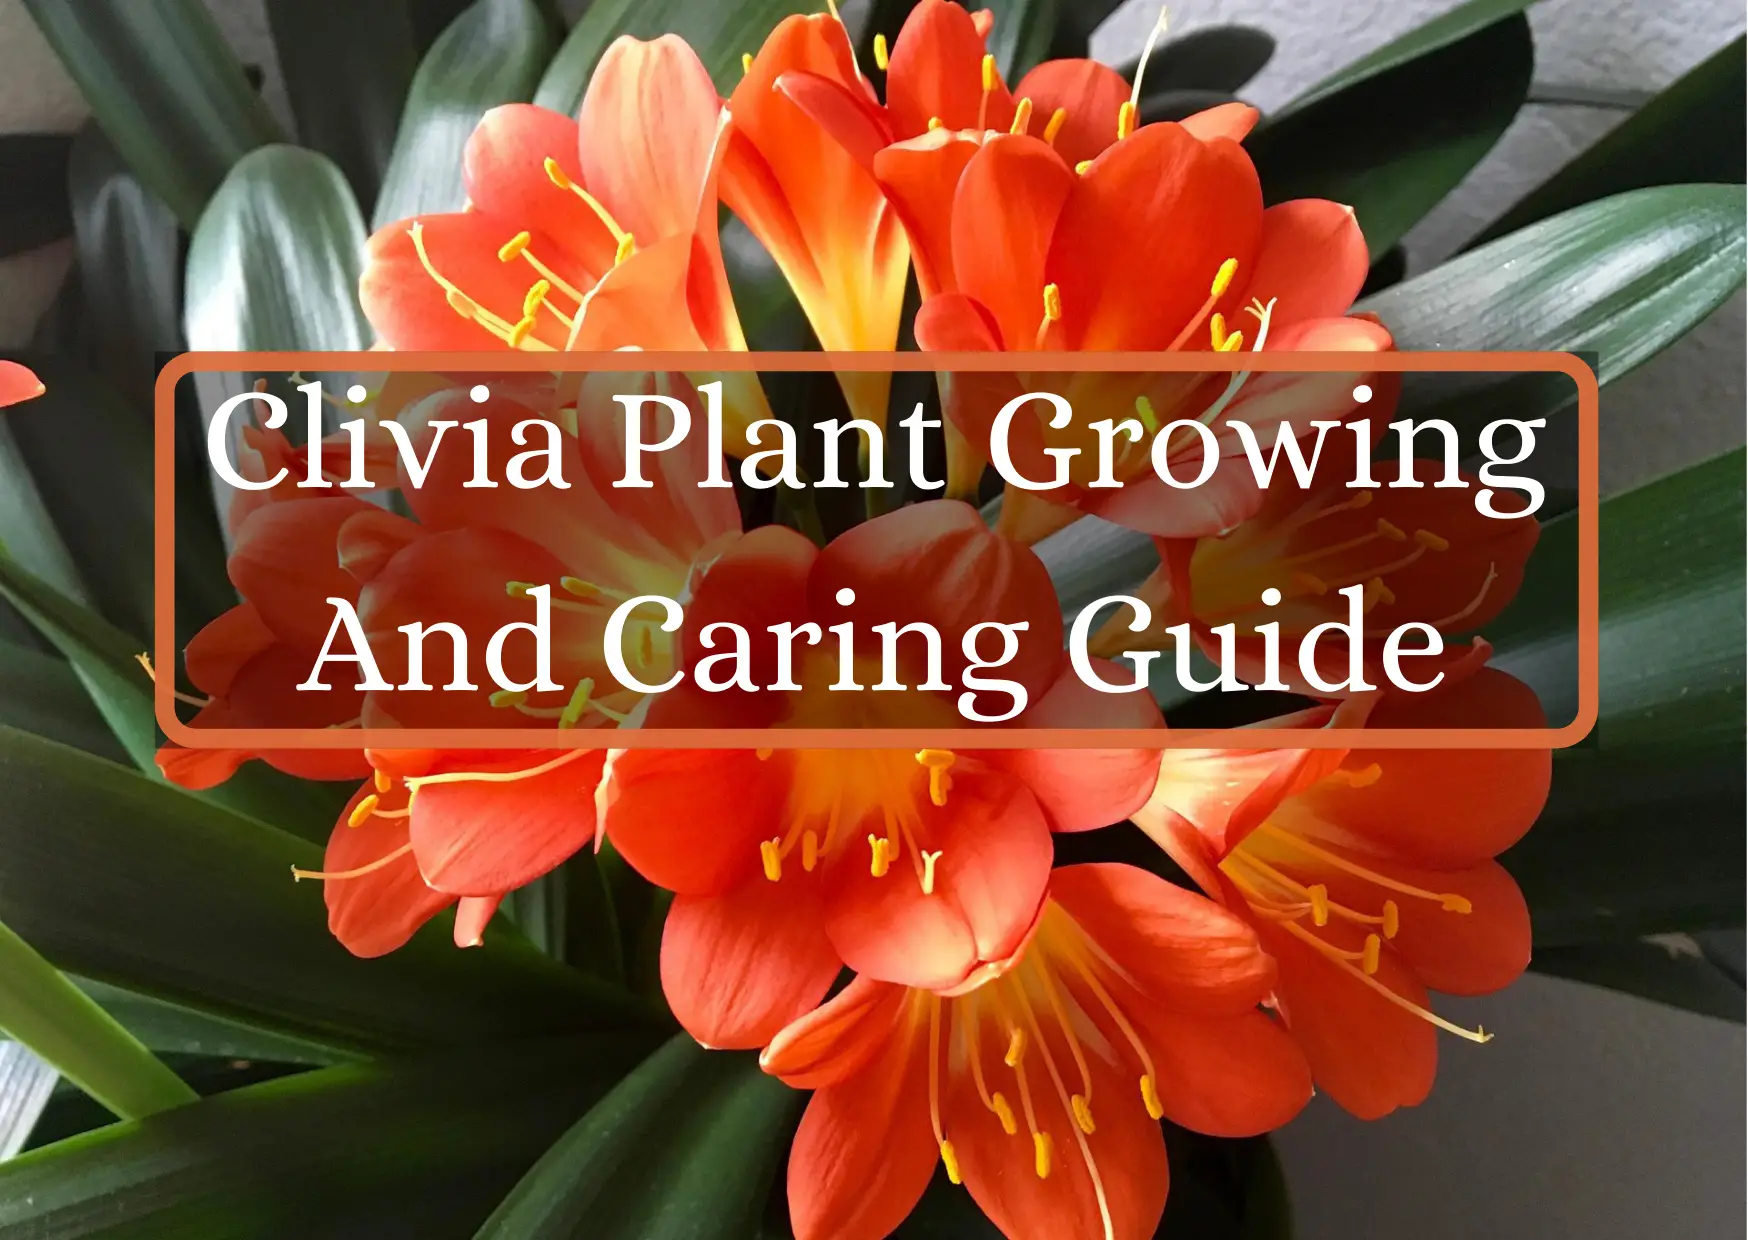 Clivia Plant Growing And Caring Guide